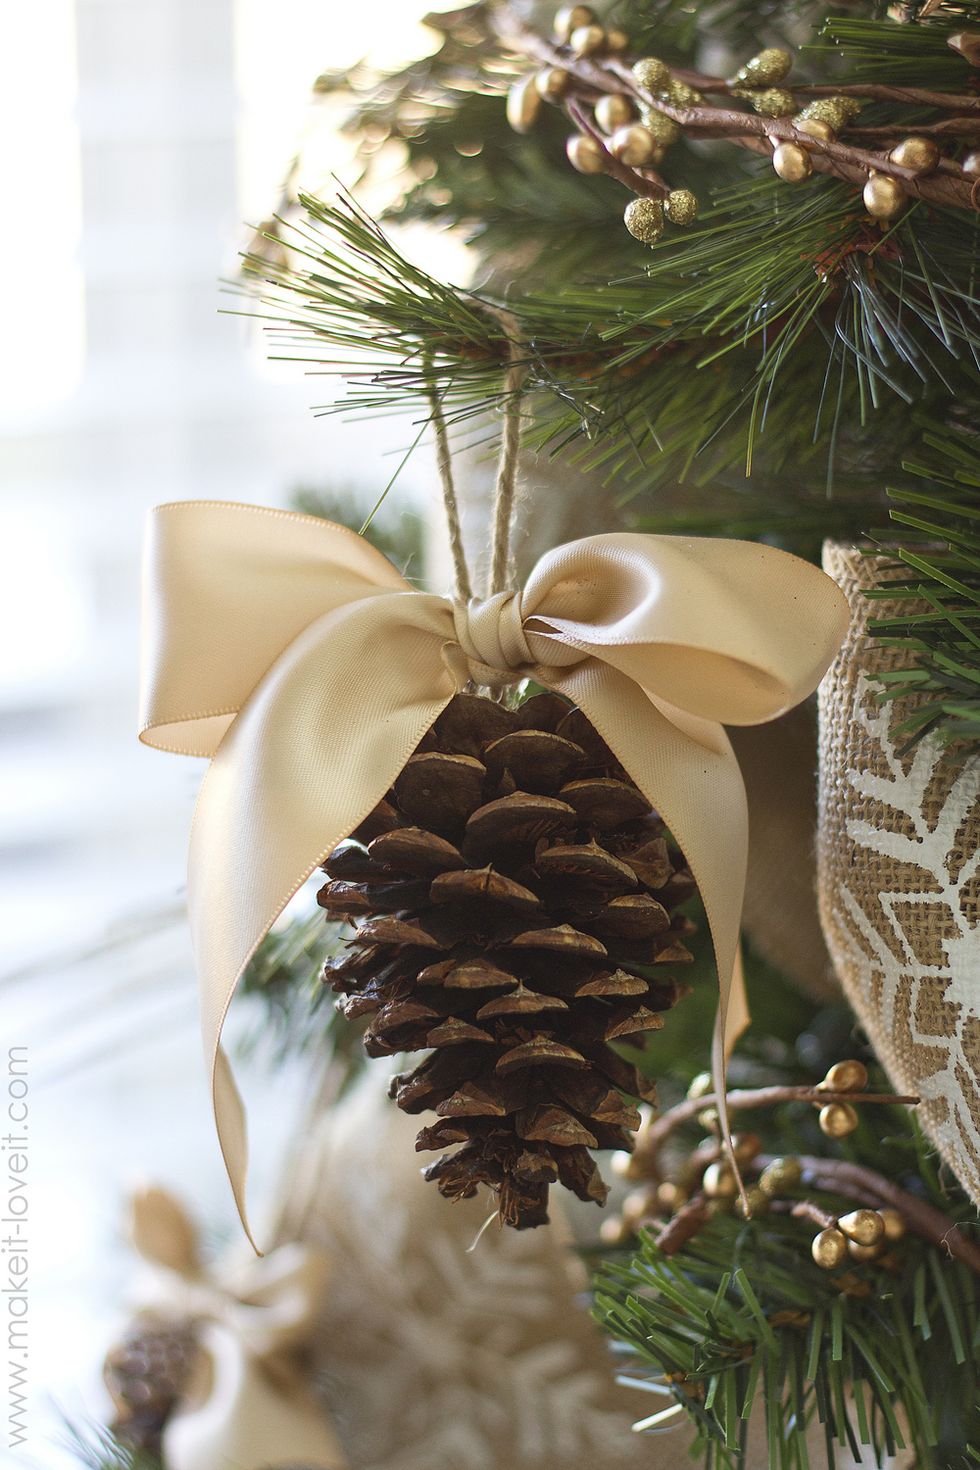 Wiring pine cones to make Christmas decorations